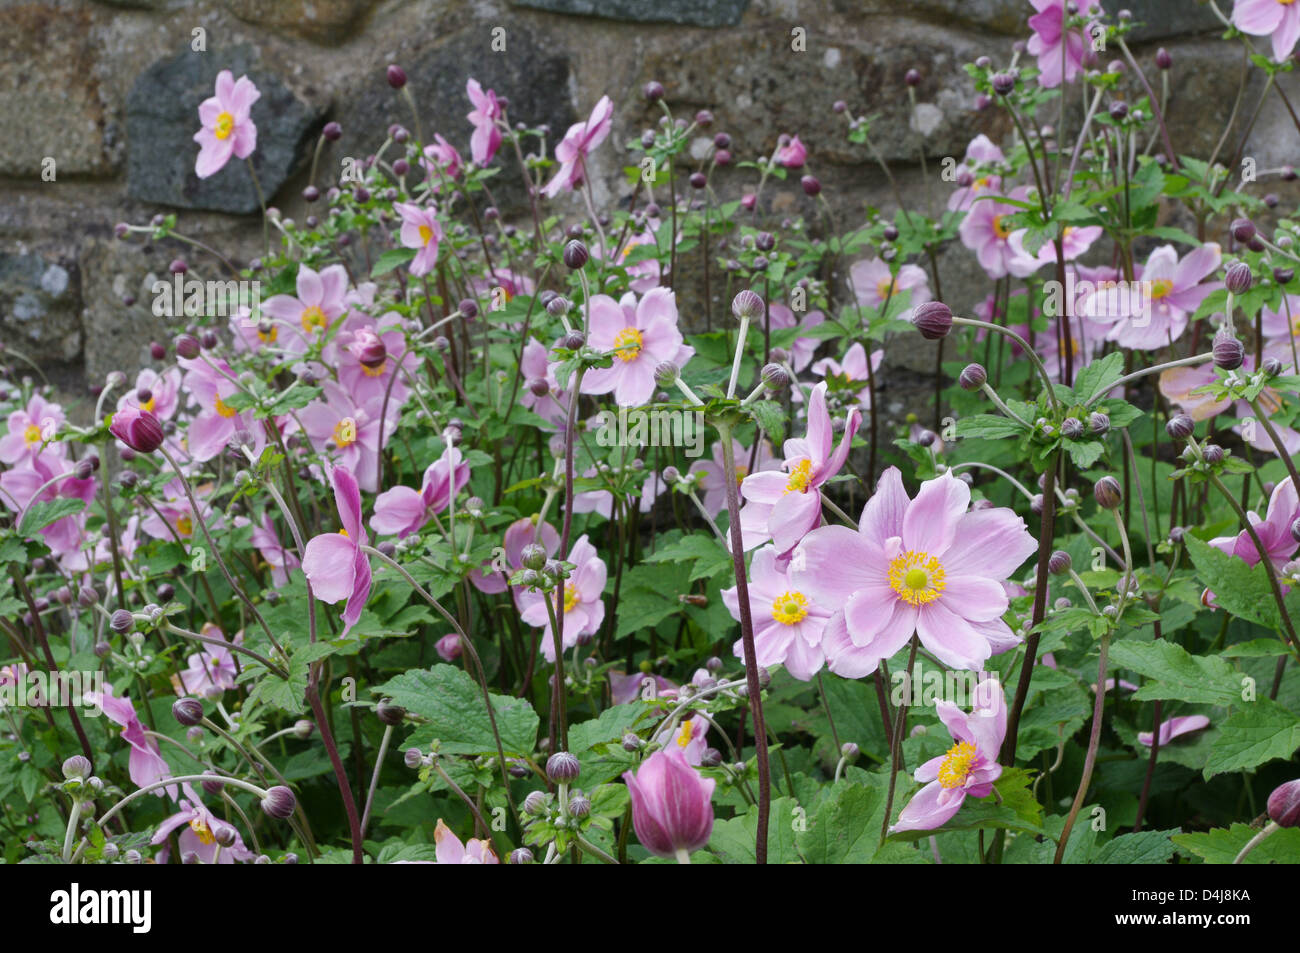 Pink Japanese anemone, Anemone hupehensis, large clump of flowers and buds with stone wall behind Stock Photo